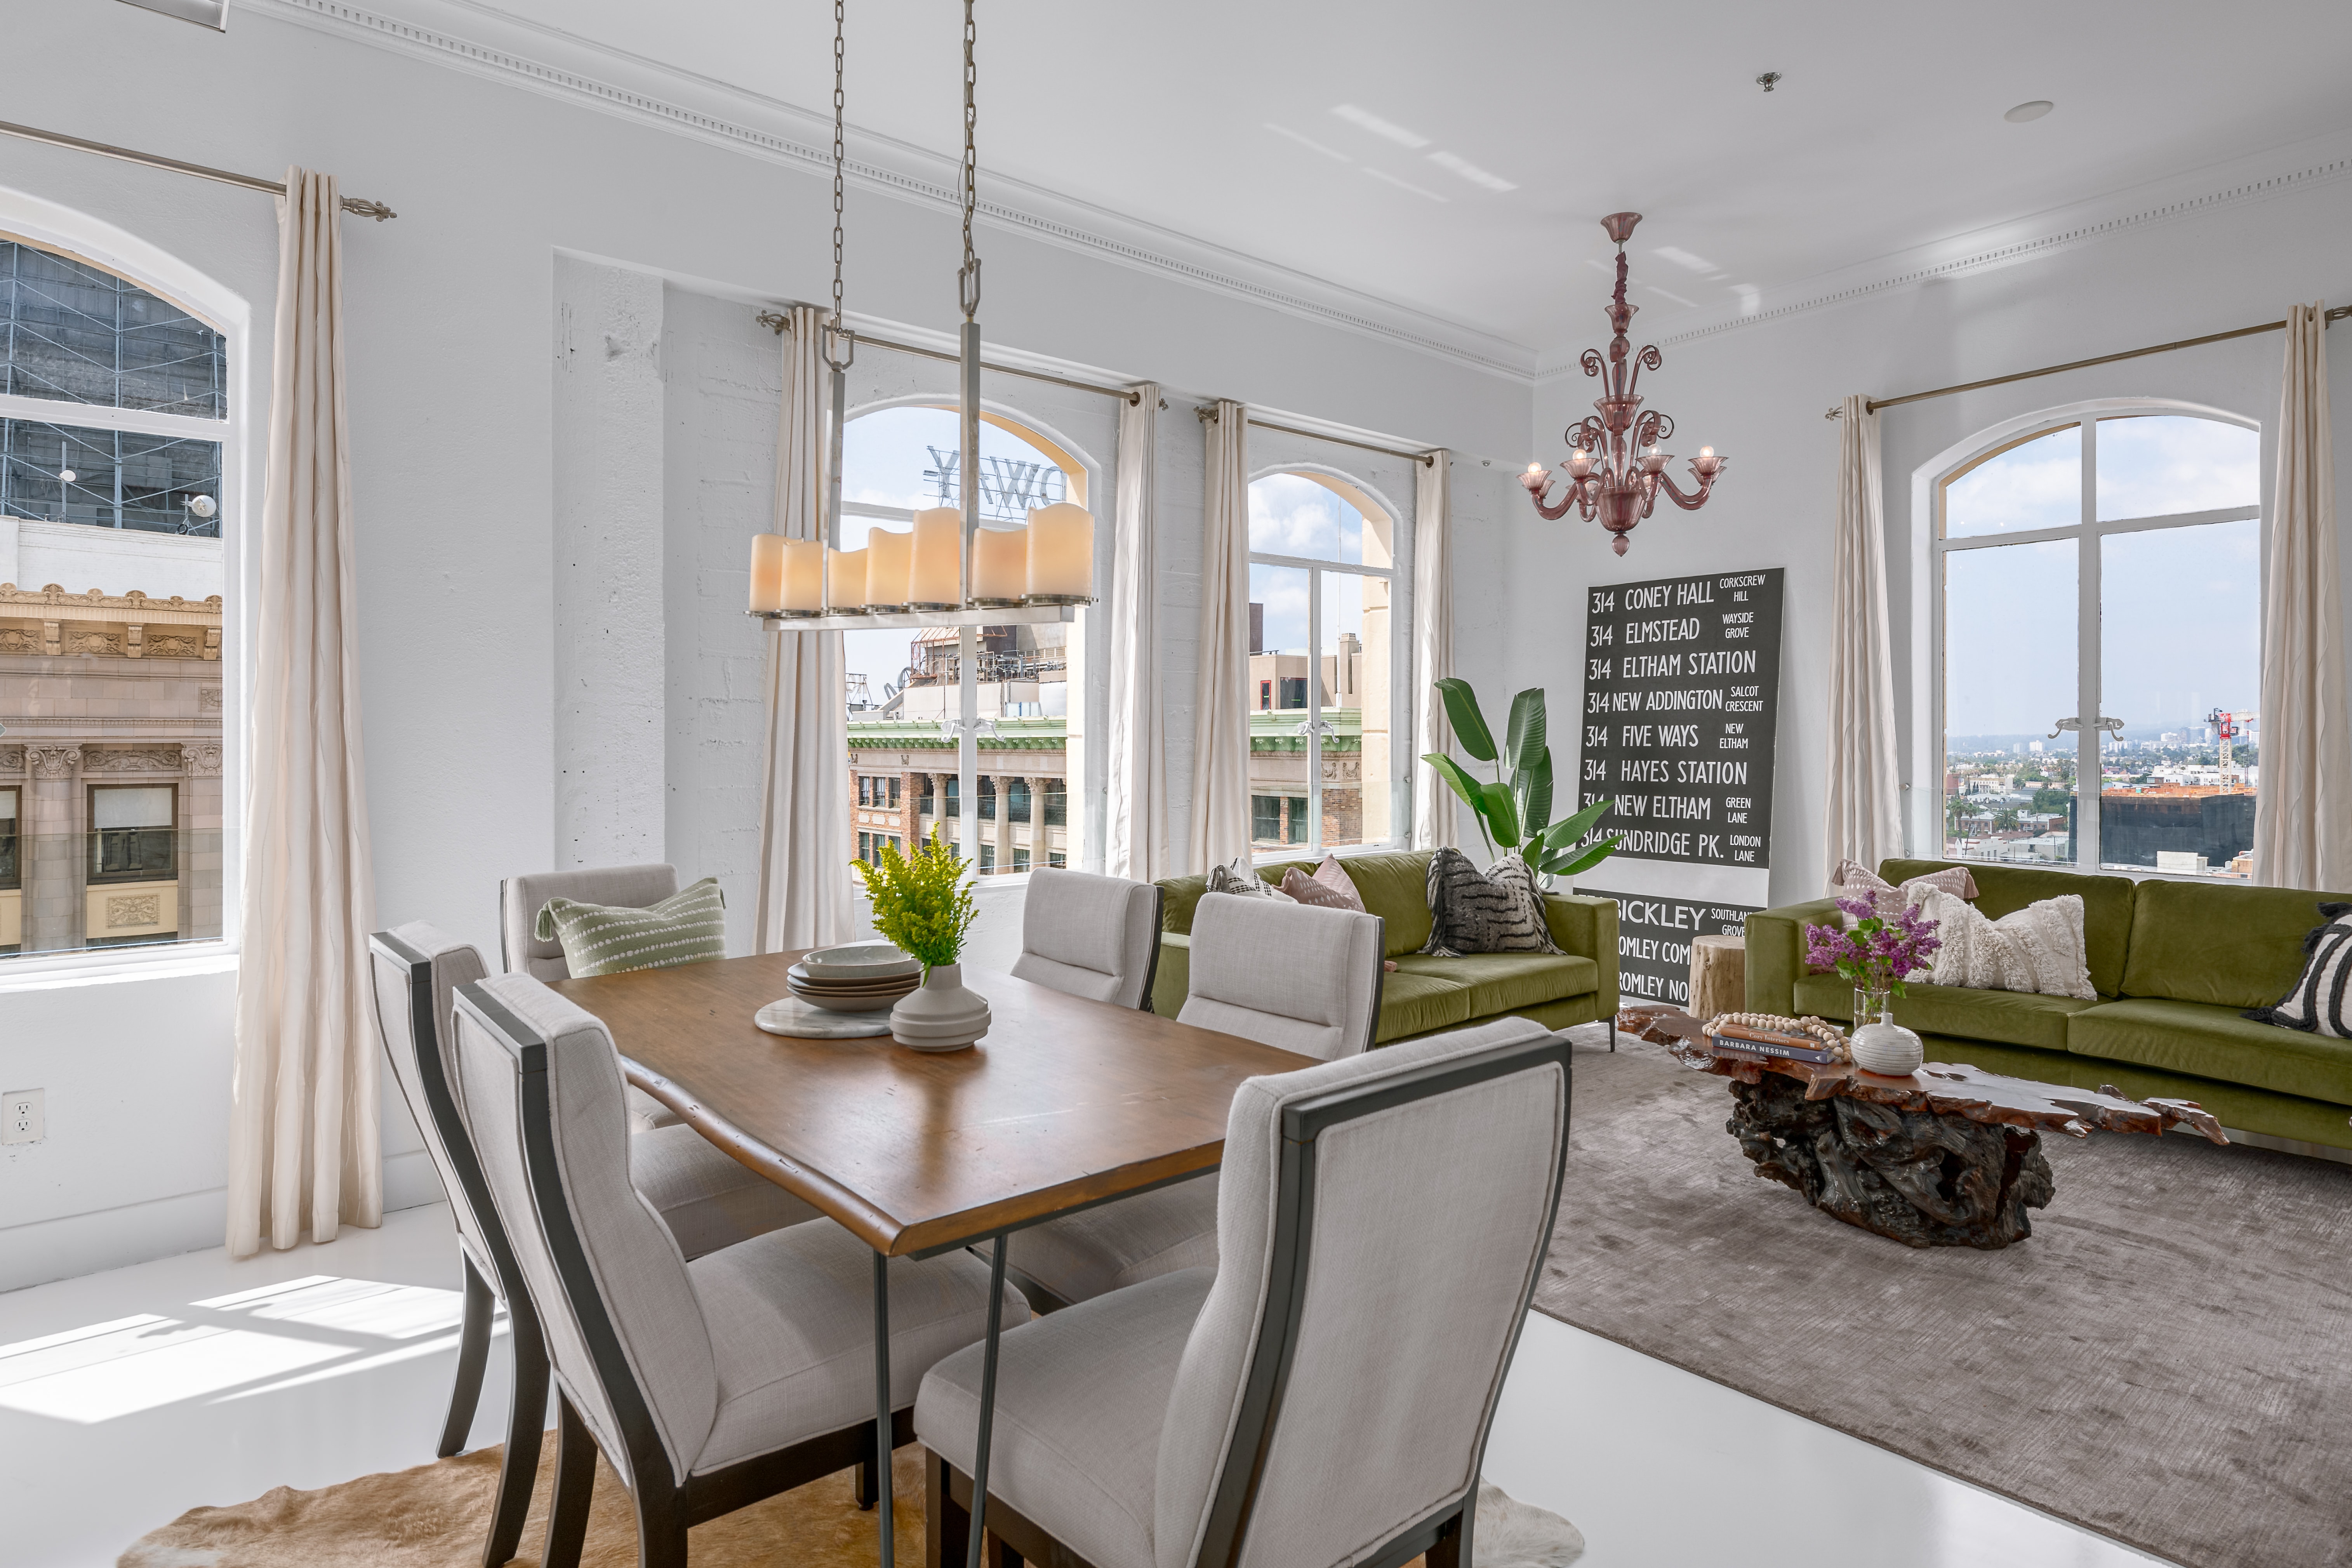 White walls, decorative lighting and archways embrace the formal dining room. Opens to living area.